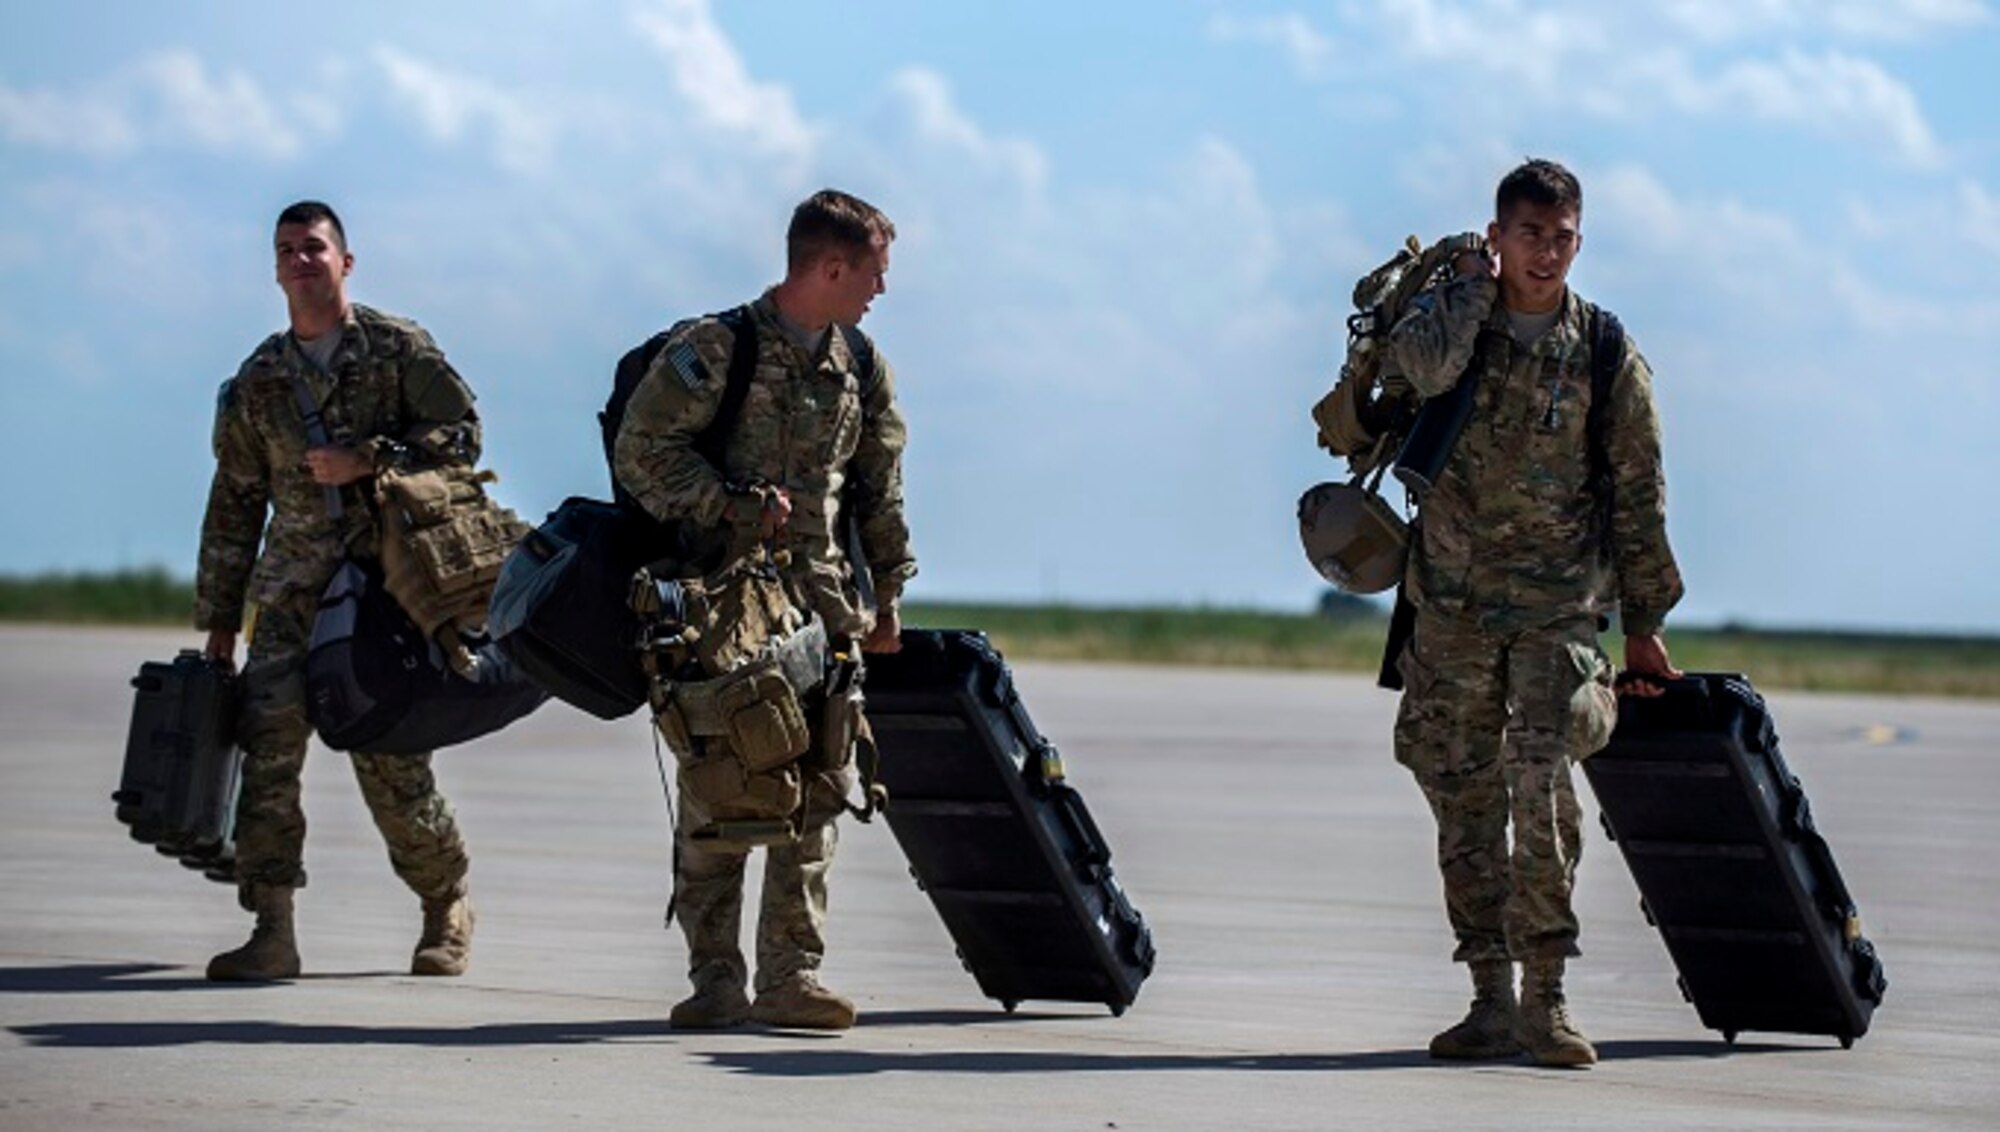 Three Airmen walk along the flight line with suitcases and packed bags